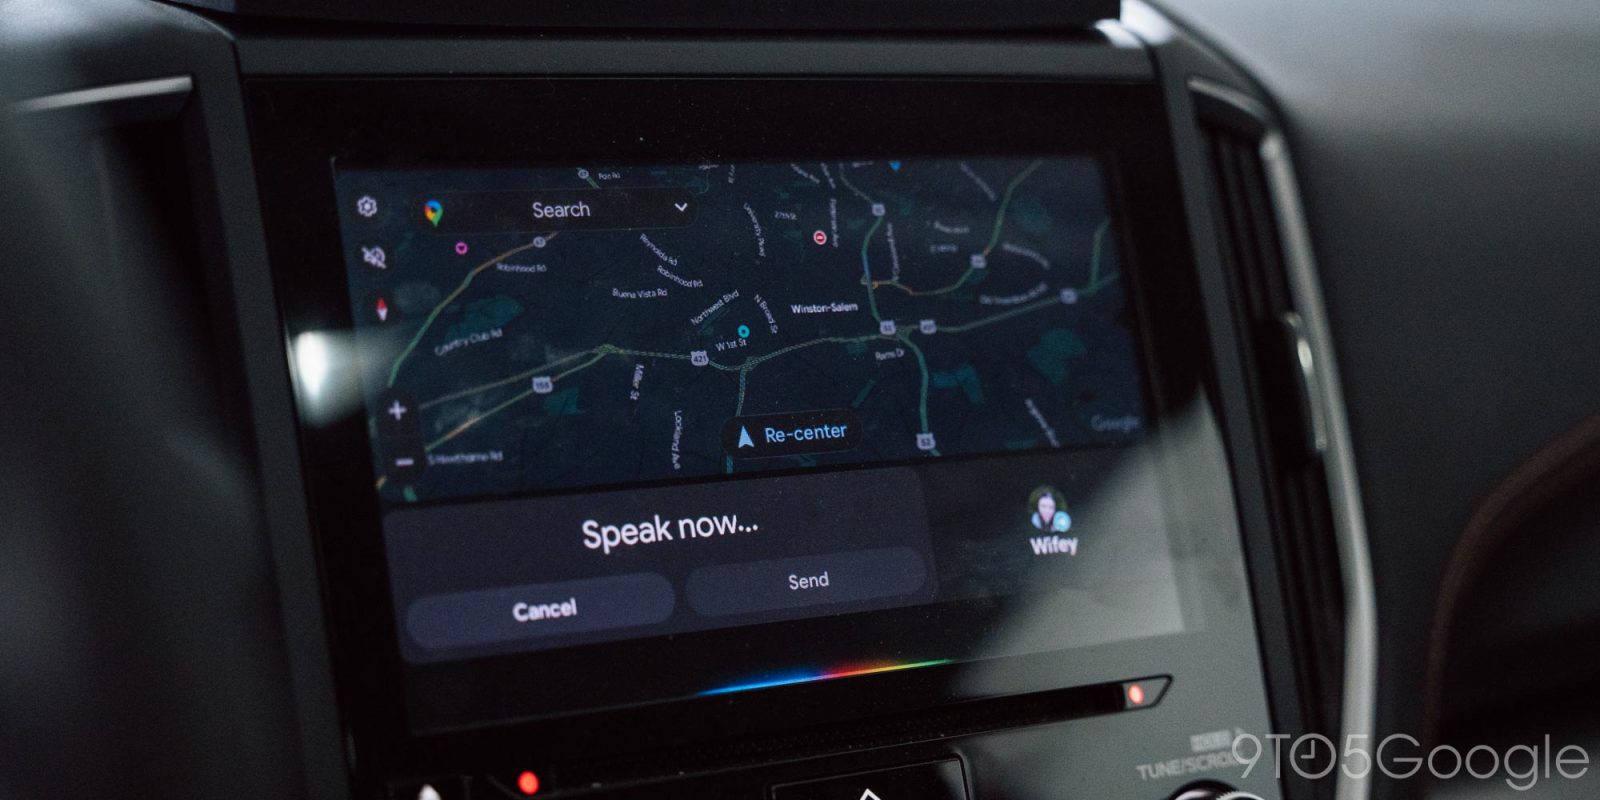 Android Auto starts reading every message you send twice